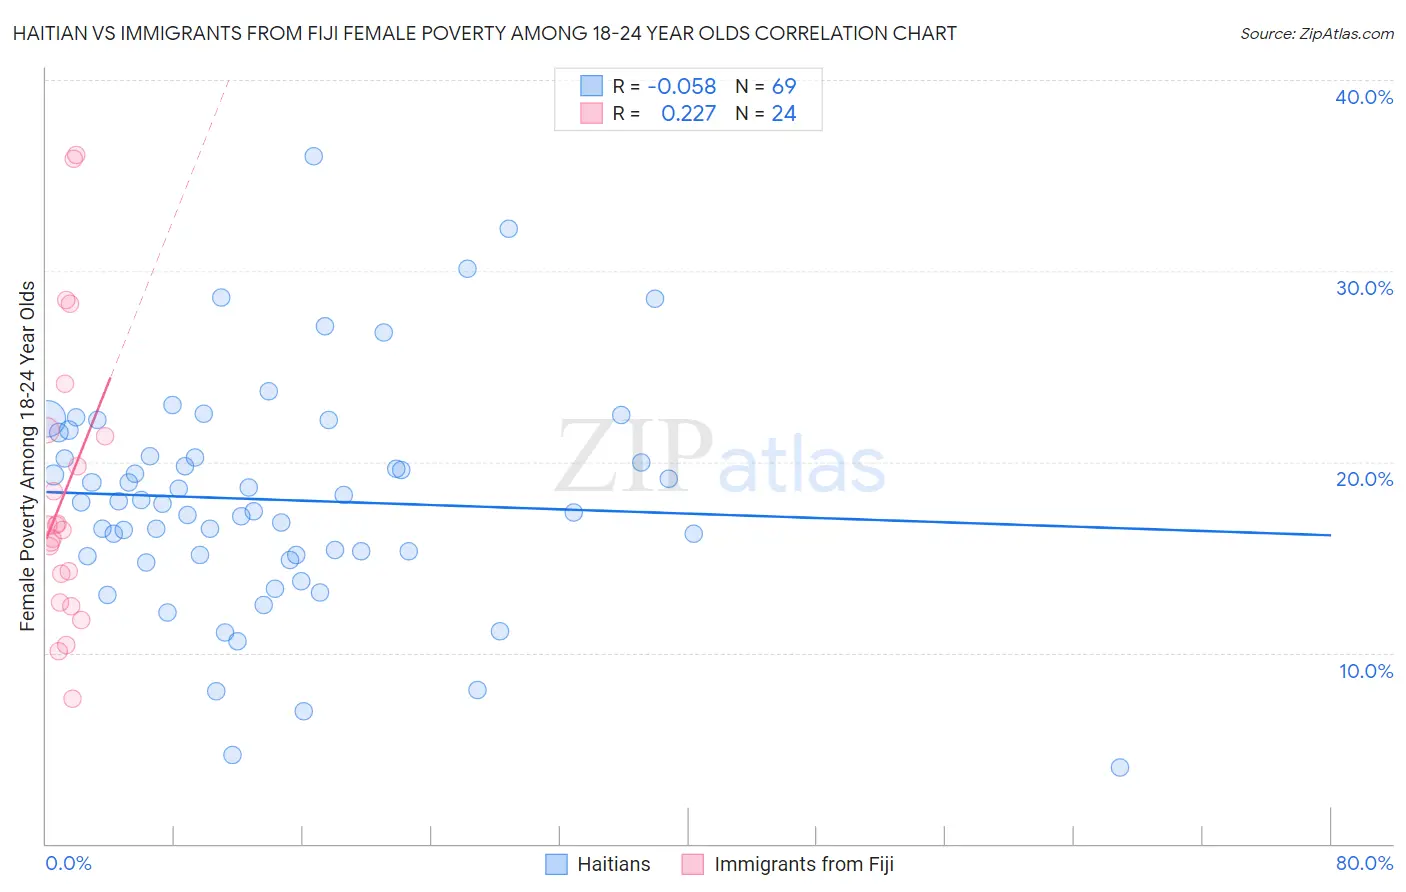 Haitian vs Immigrants from Fiji Female Poverty Among 18-24 Year Olds